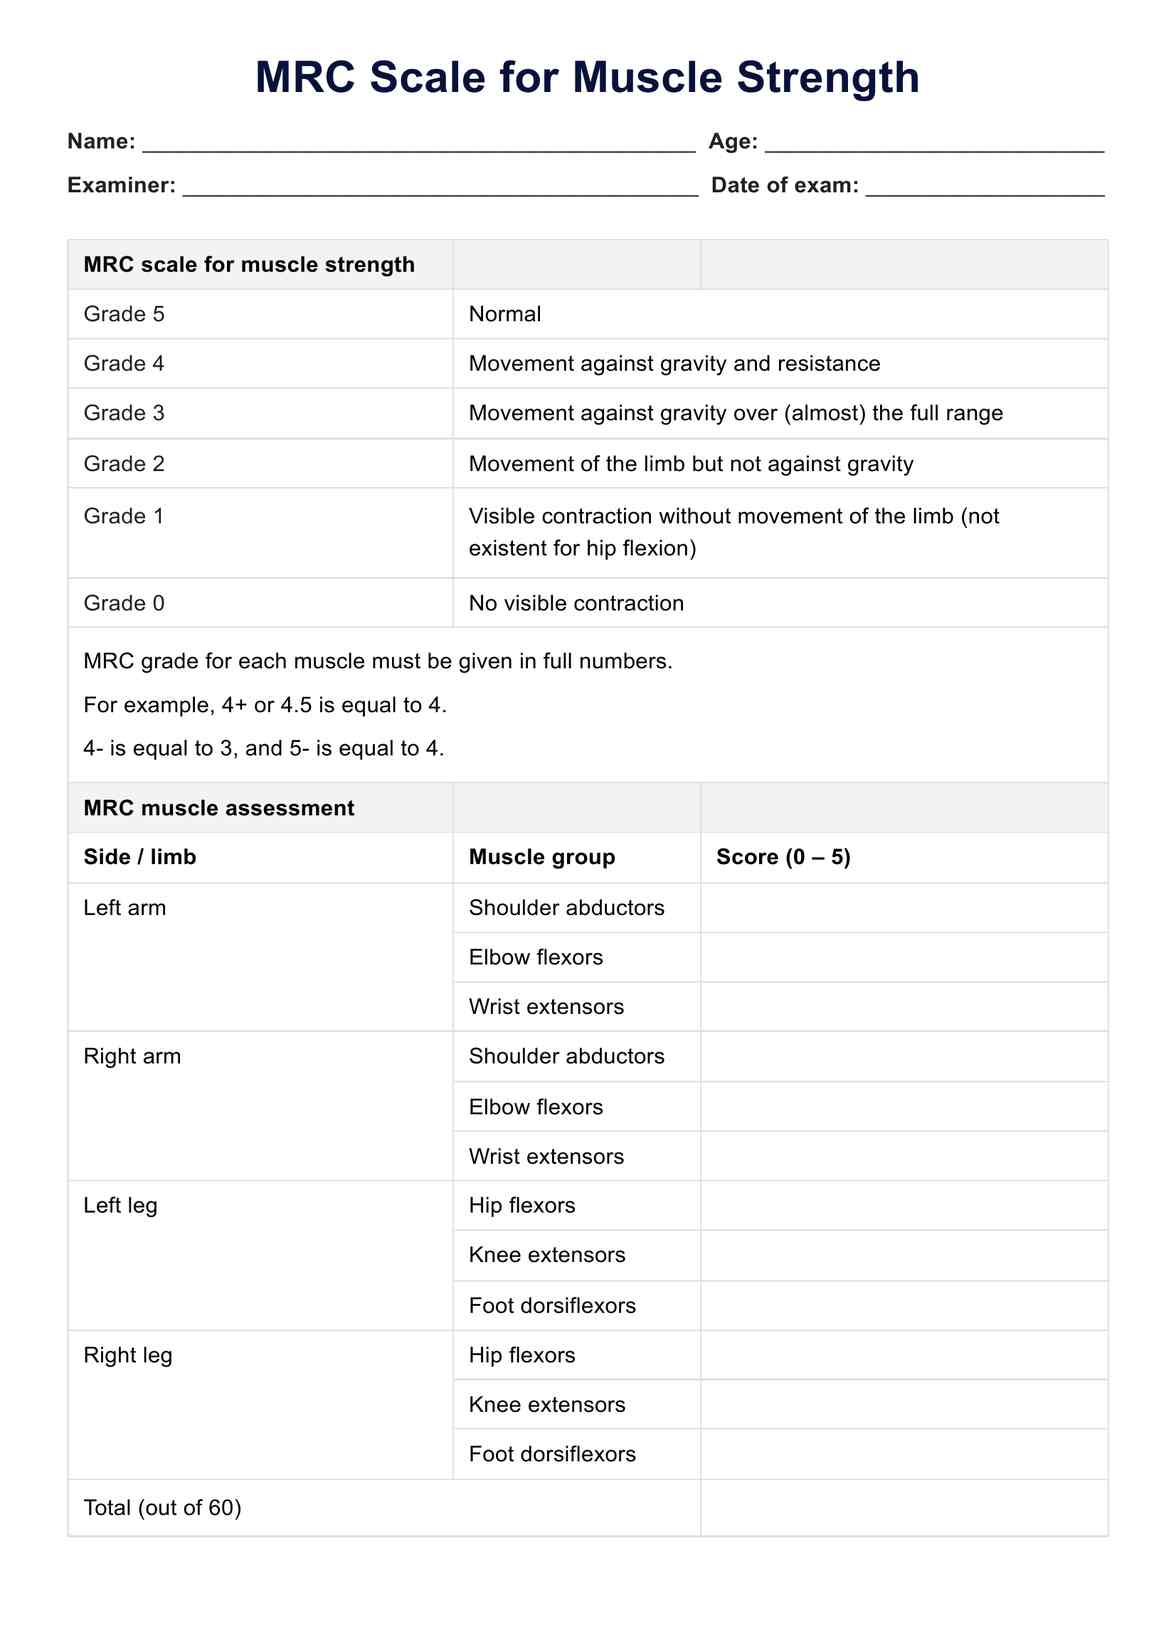 MRC Scale for Muscle Strength PDF Example